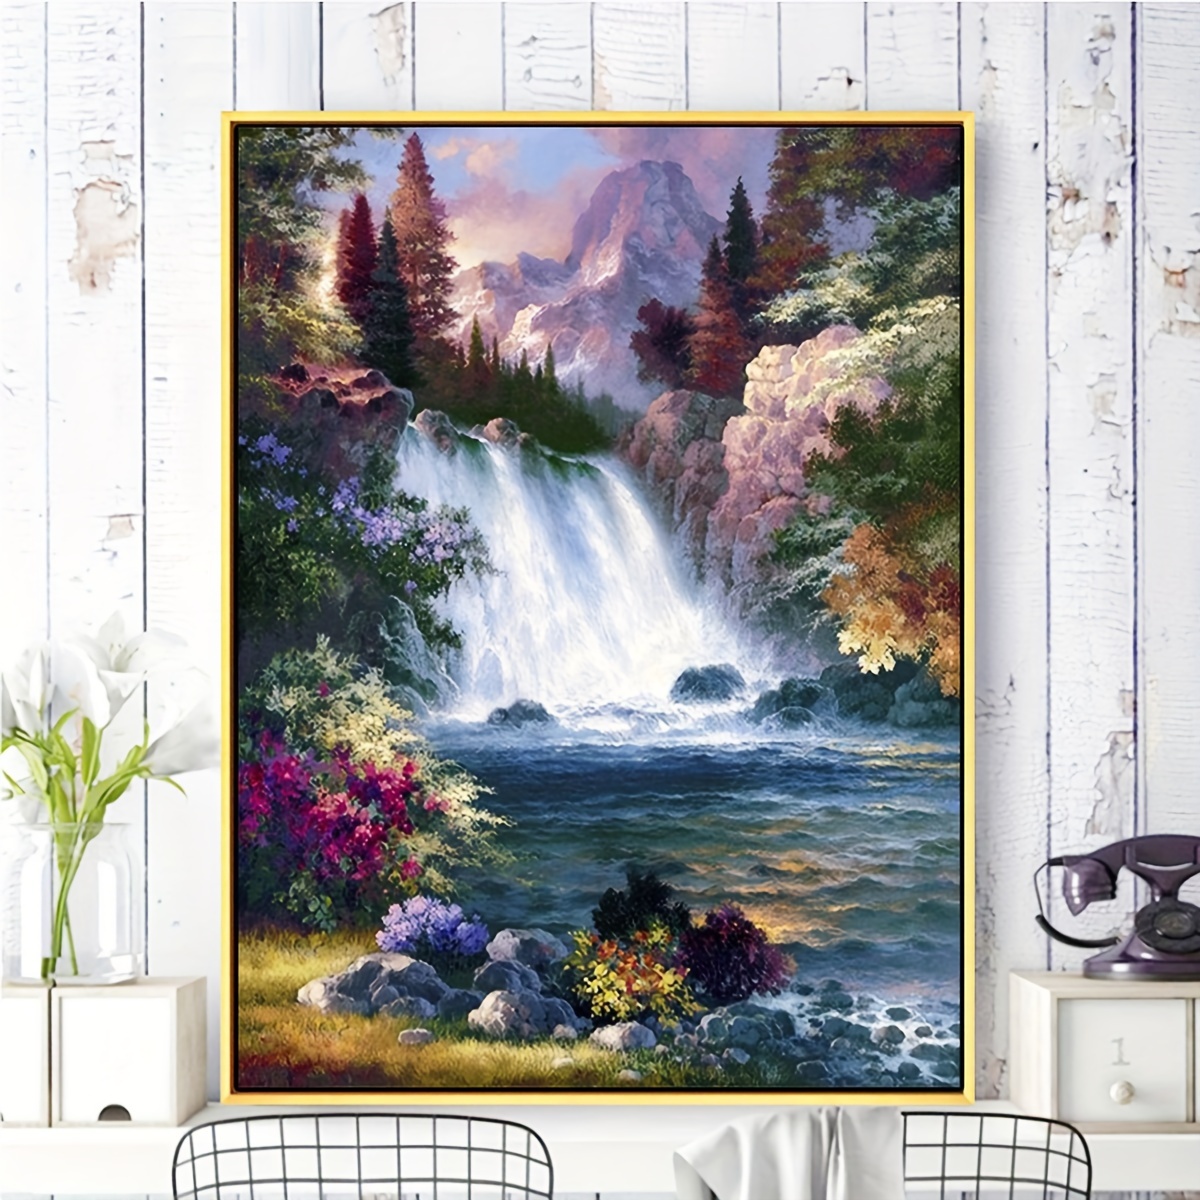 

1set Diy Cross Stitch Kit, Fall Landscape Pattern Cross Stitch Material Package, Living Room Entrance Bedroom Decoration Painting